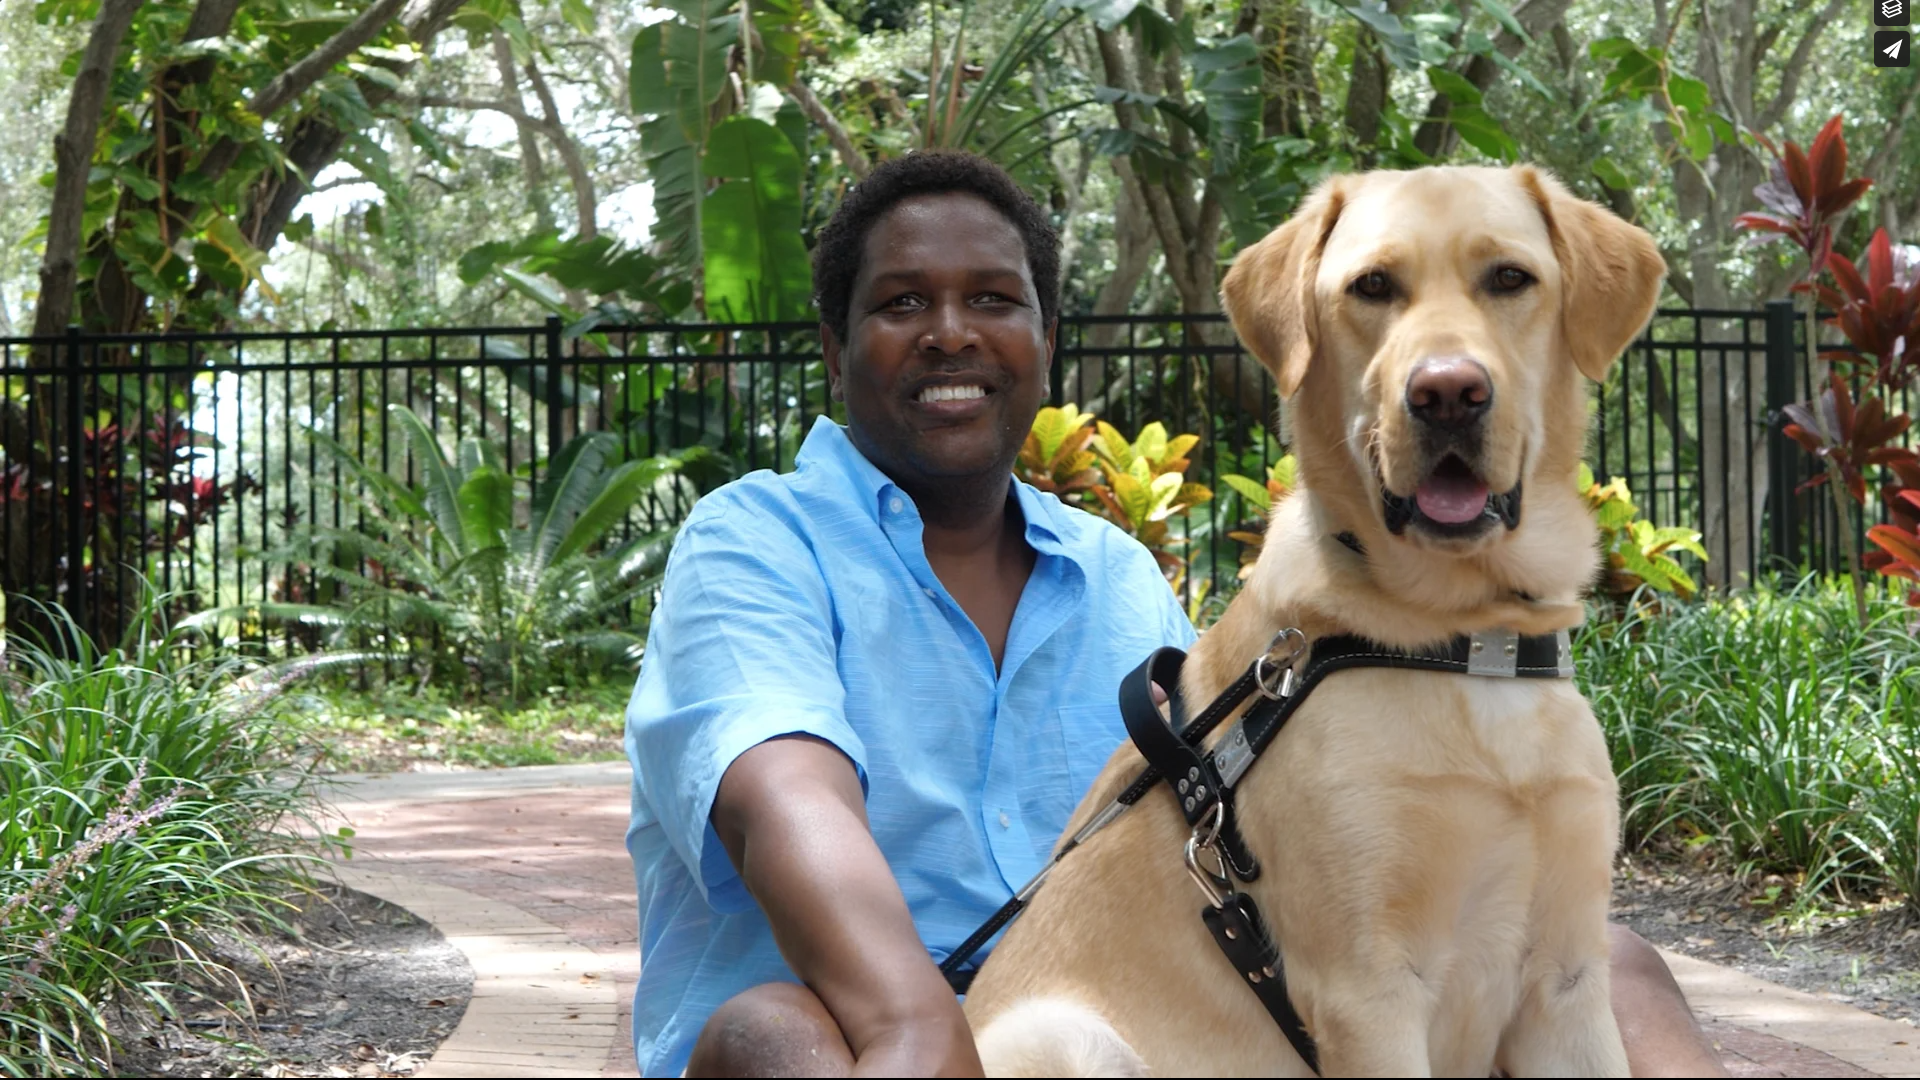 Man and yellow guide dog both look and smiles at the camera